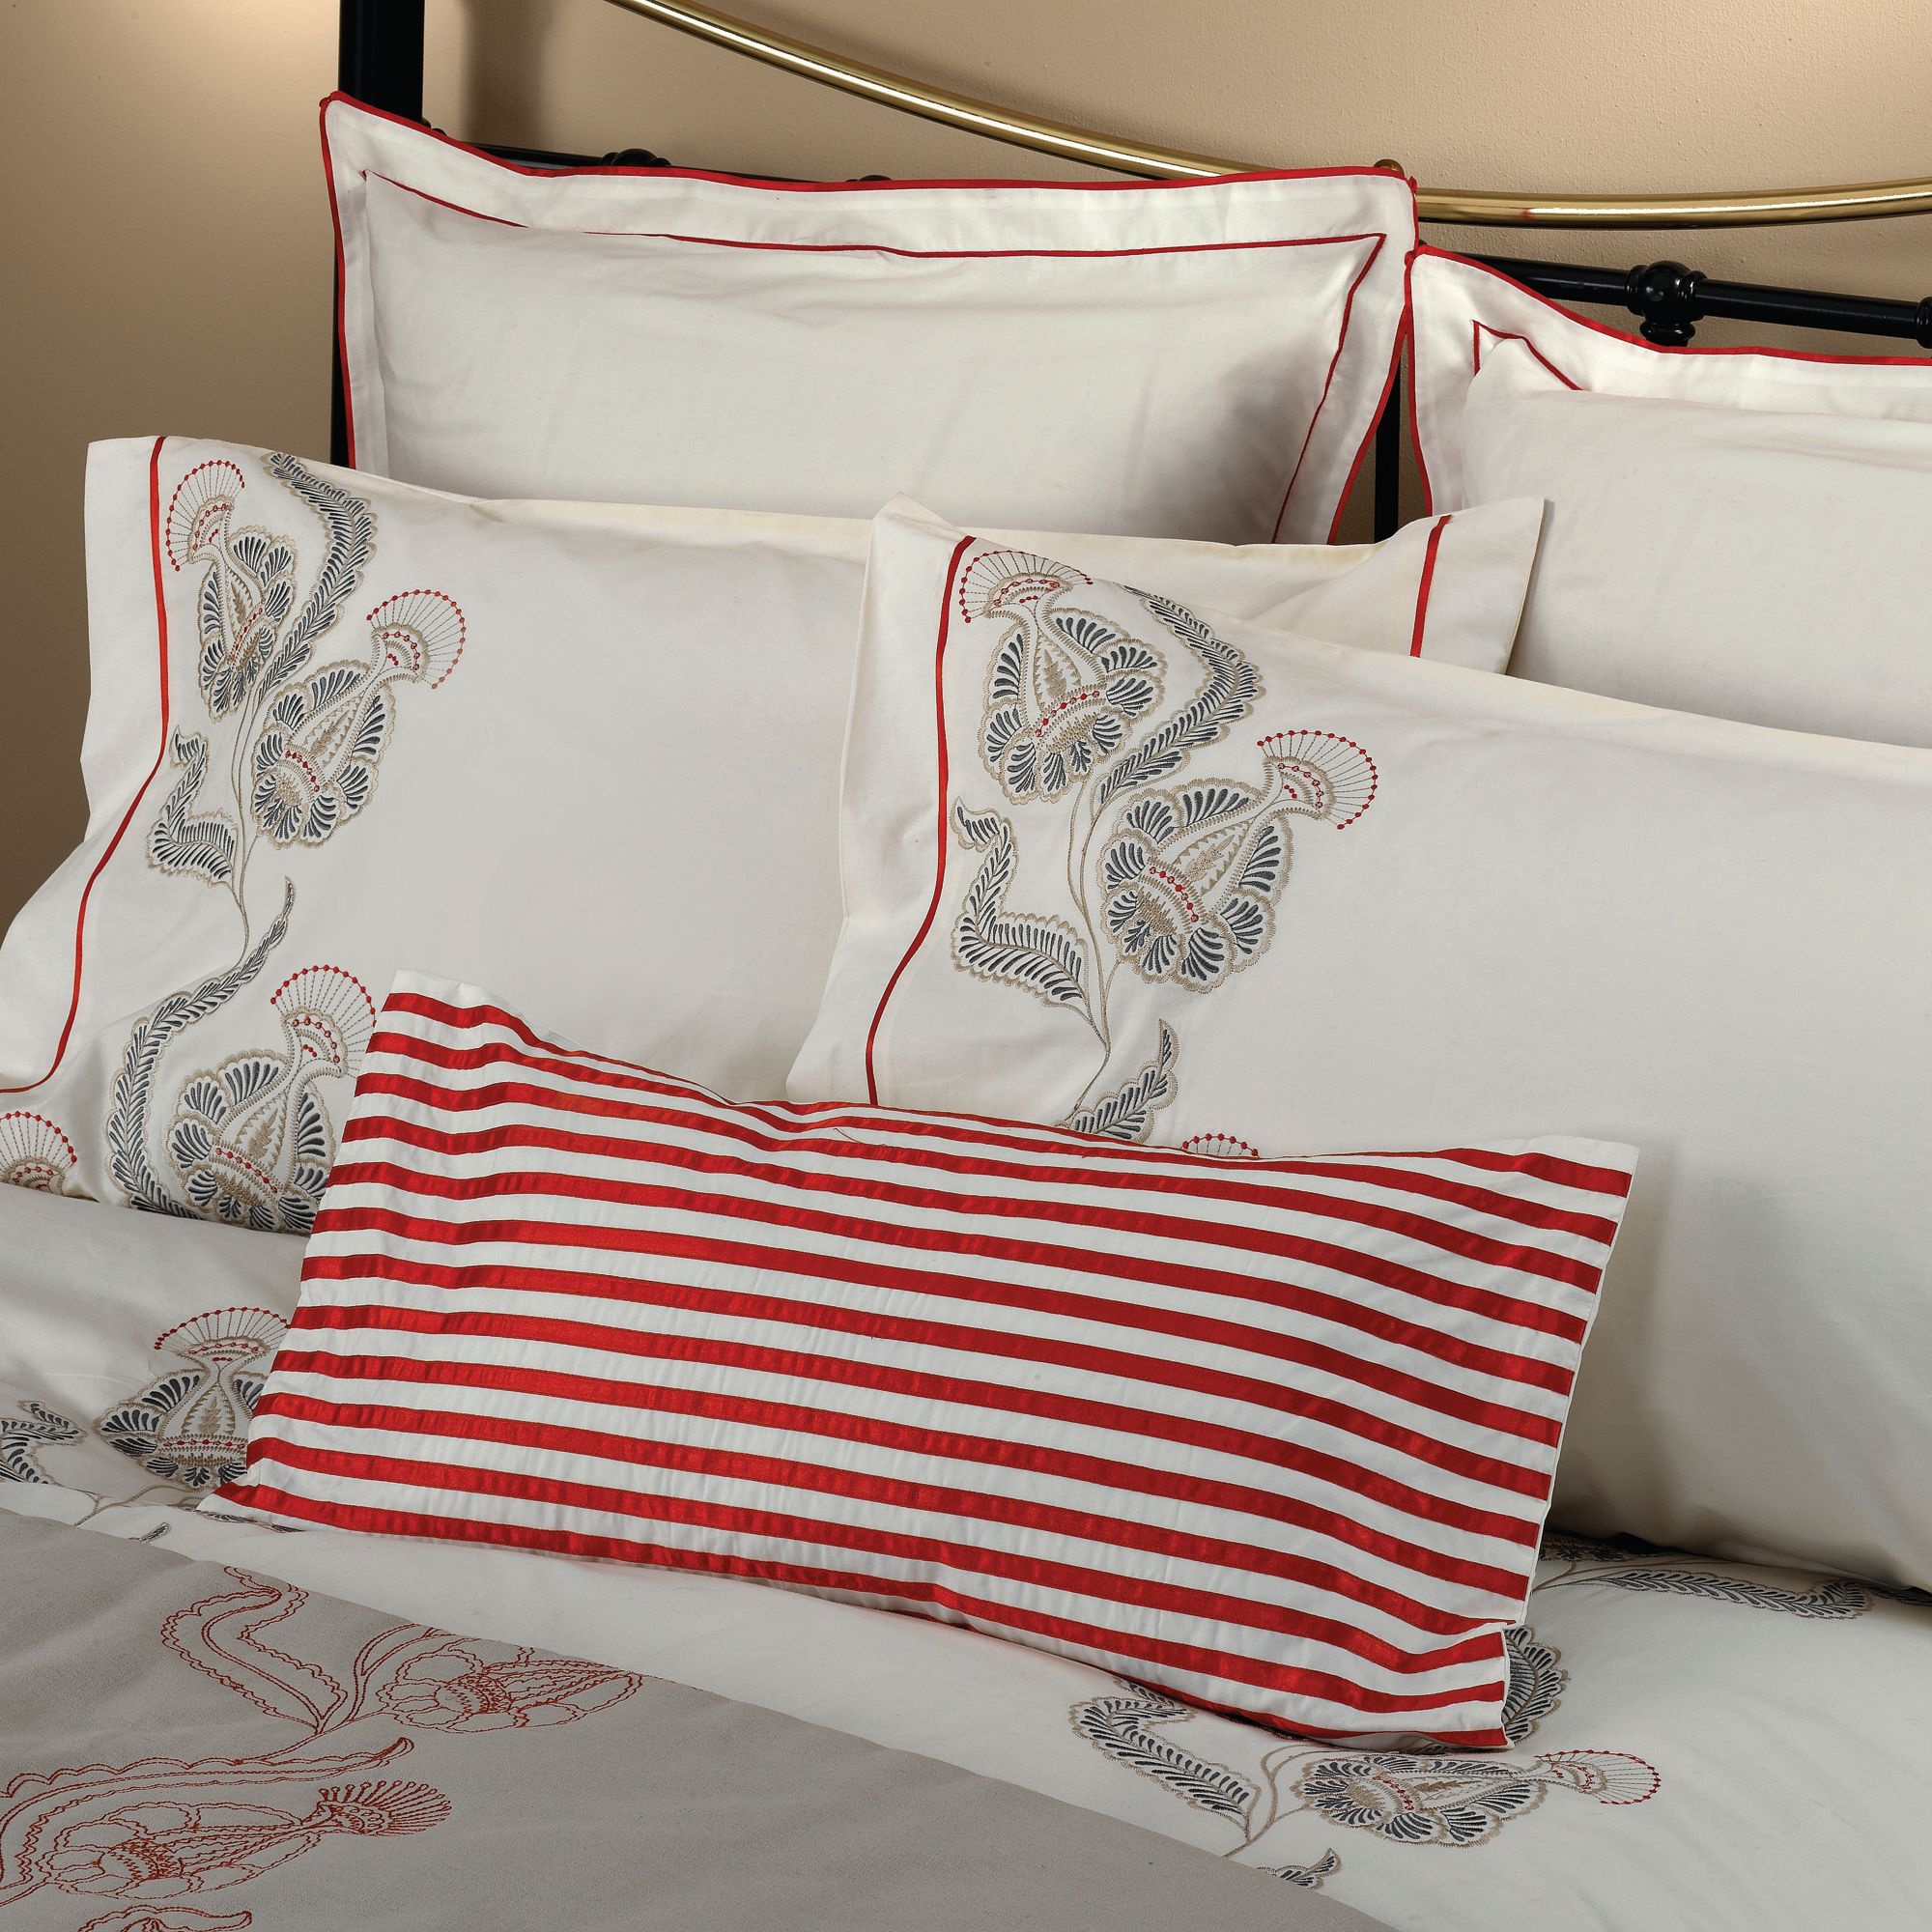 Neisha Crosland Collection Rooster Duvet Covers,